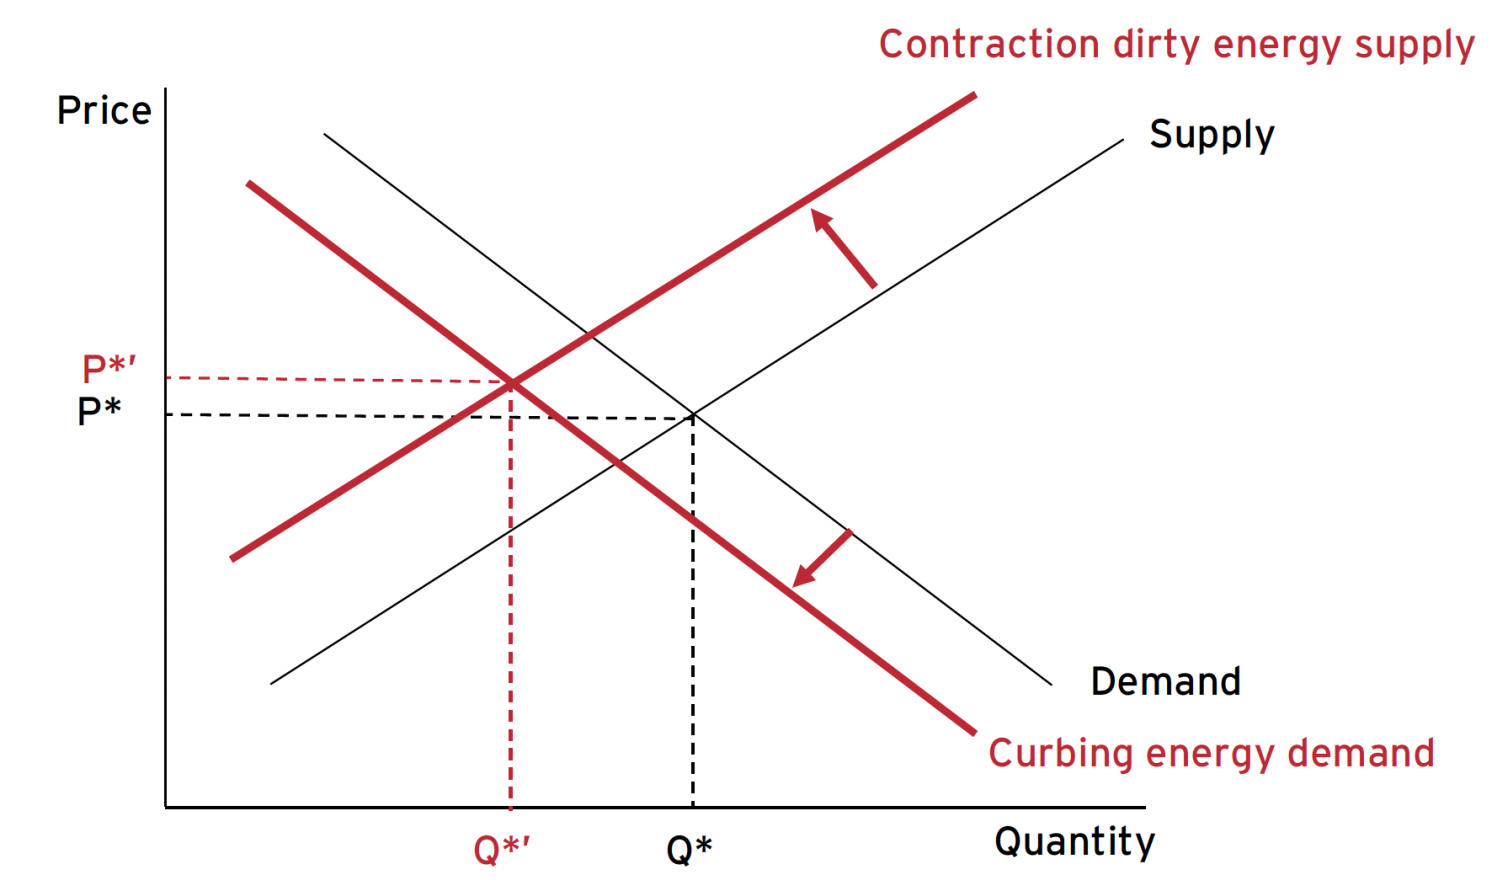 B) Contraction dirty energy supply and curbing energy demand